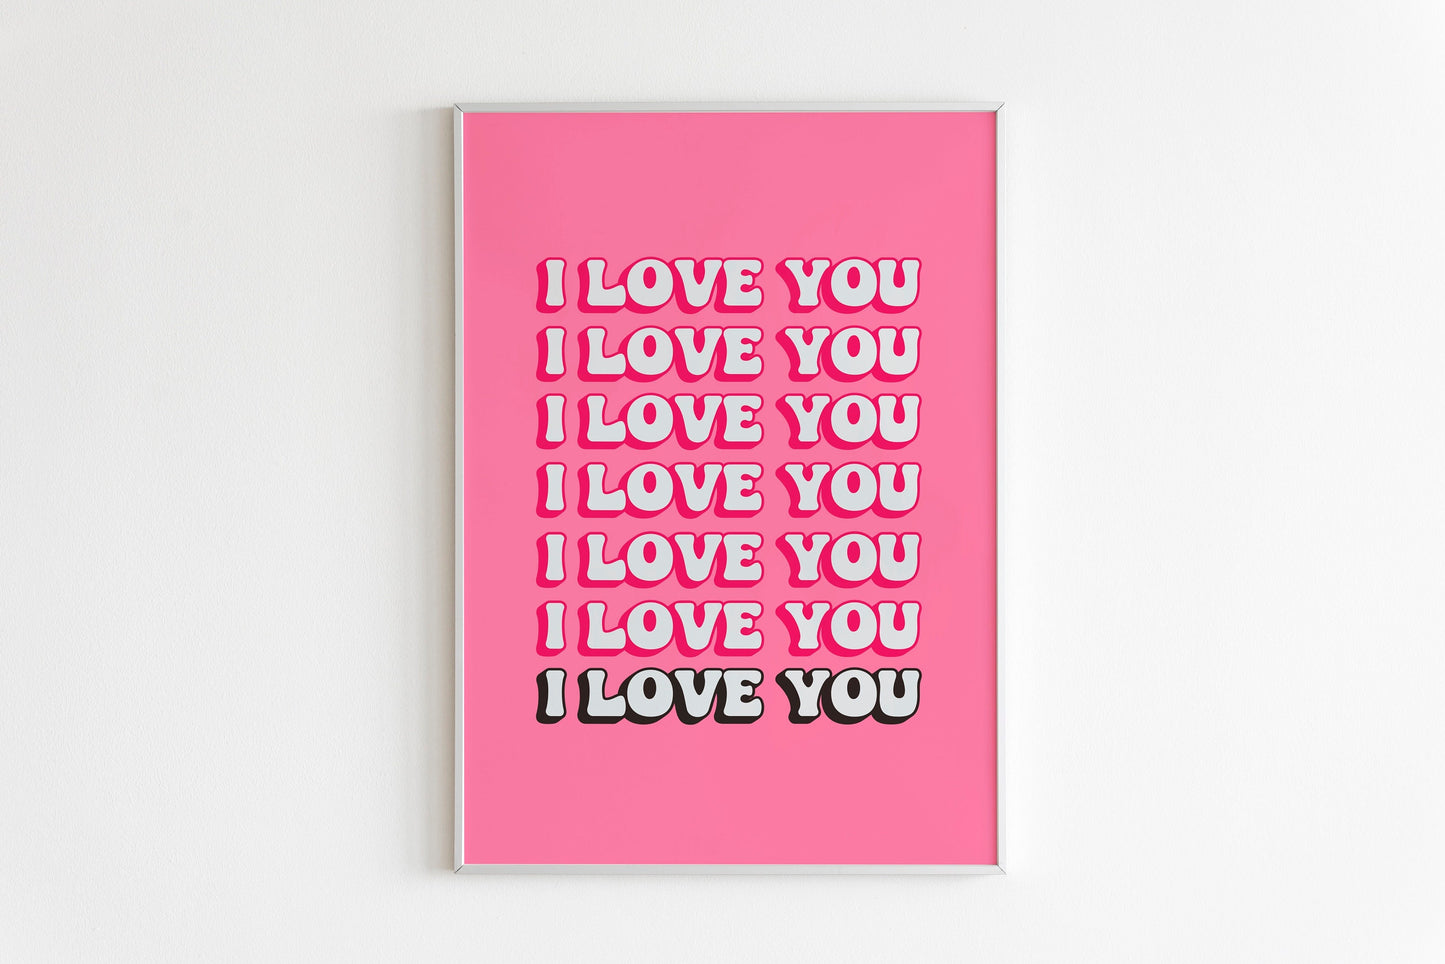 I Love You Print in Bright Pink